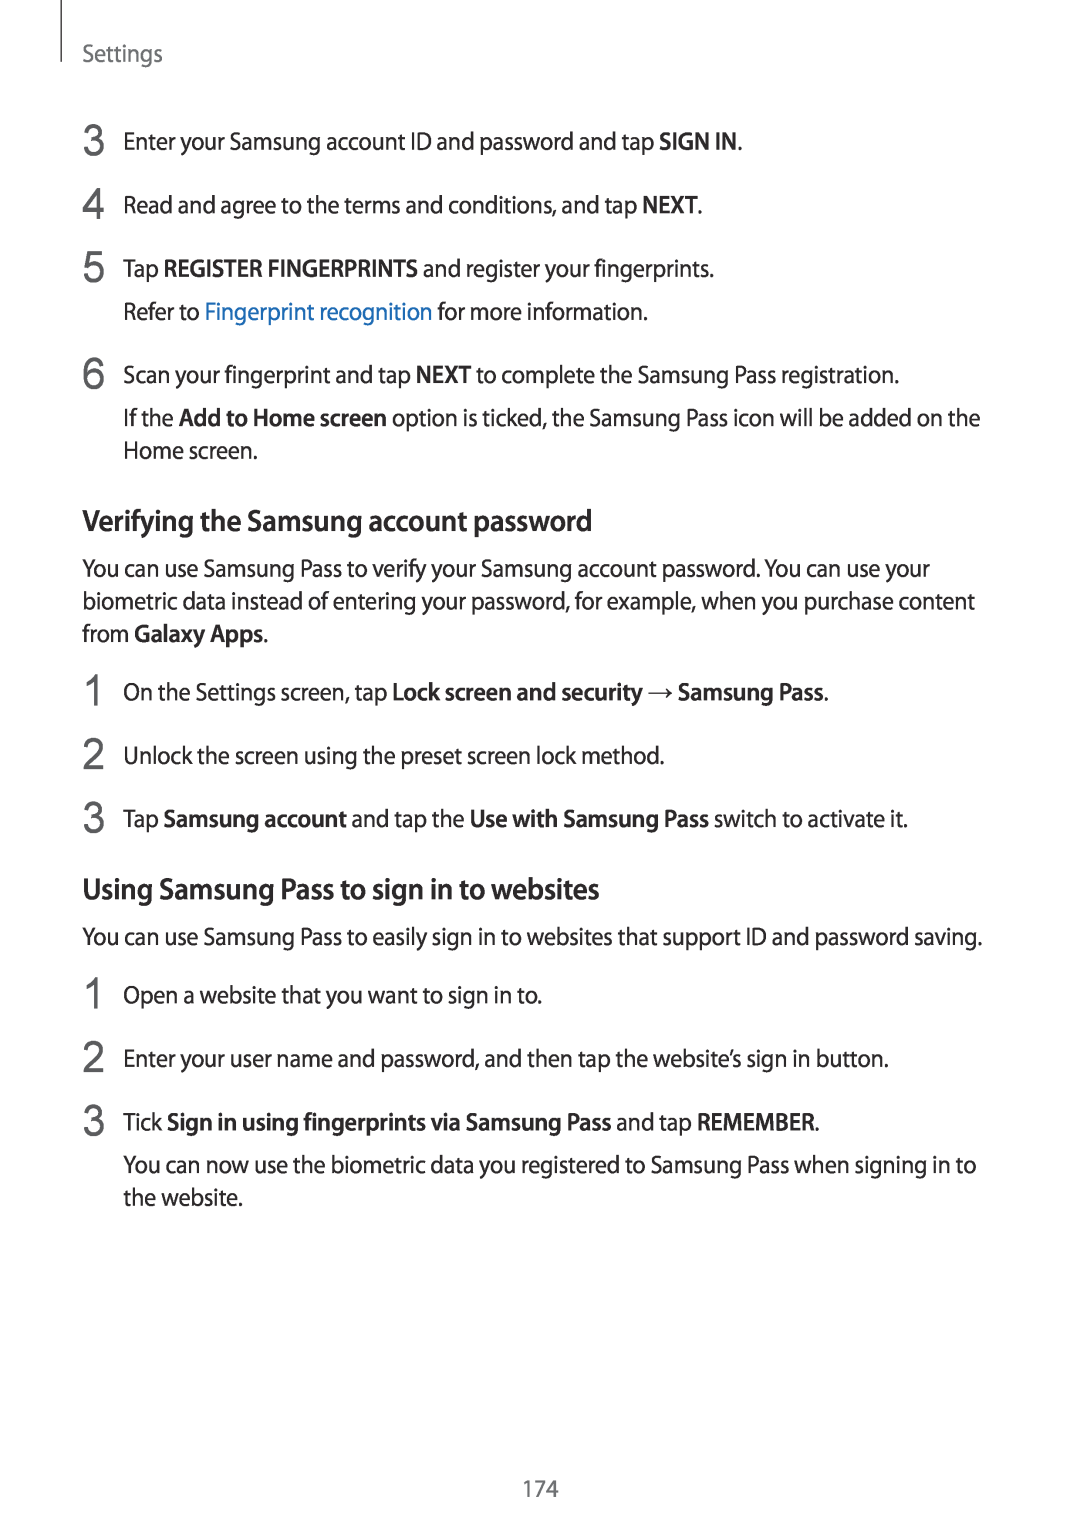 Samsung SM-A530FZDDXEH manual Verifying the Samsung account password, Using Samsung Pass to sign in to websites, Settings 